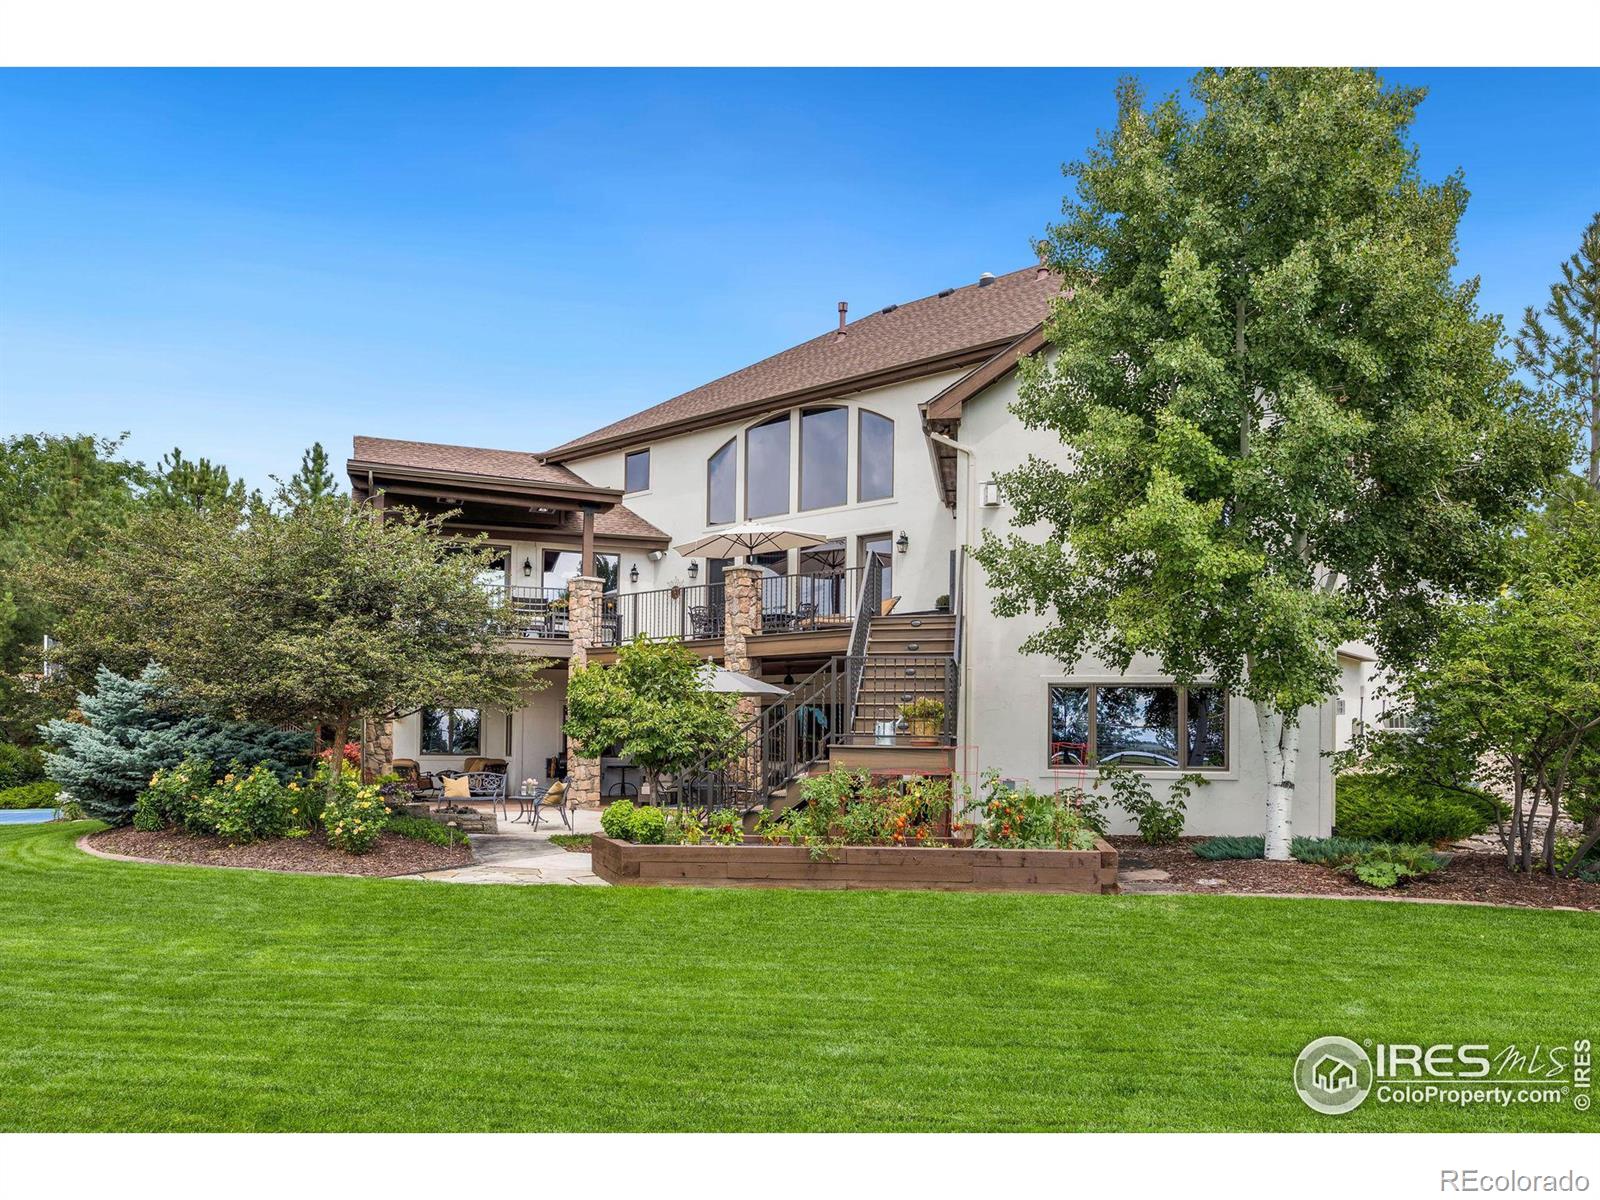 6027  wild view drive, Fort Collins sold home. Closed on 2024-05-01 for $2,665,000.